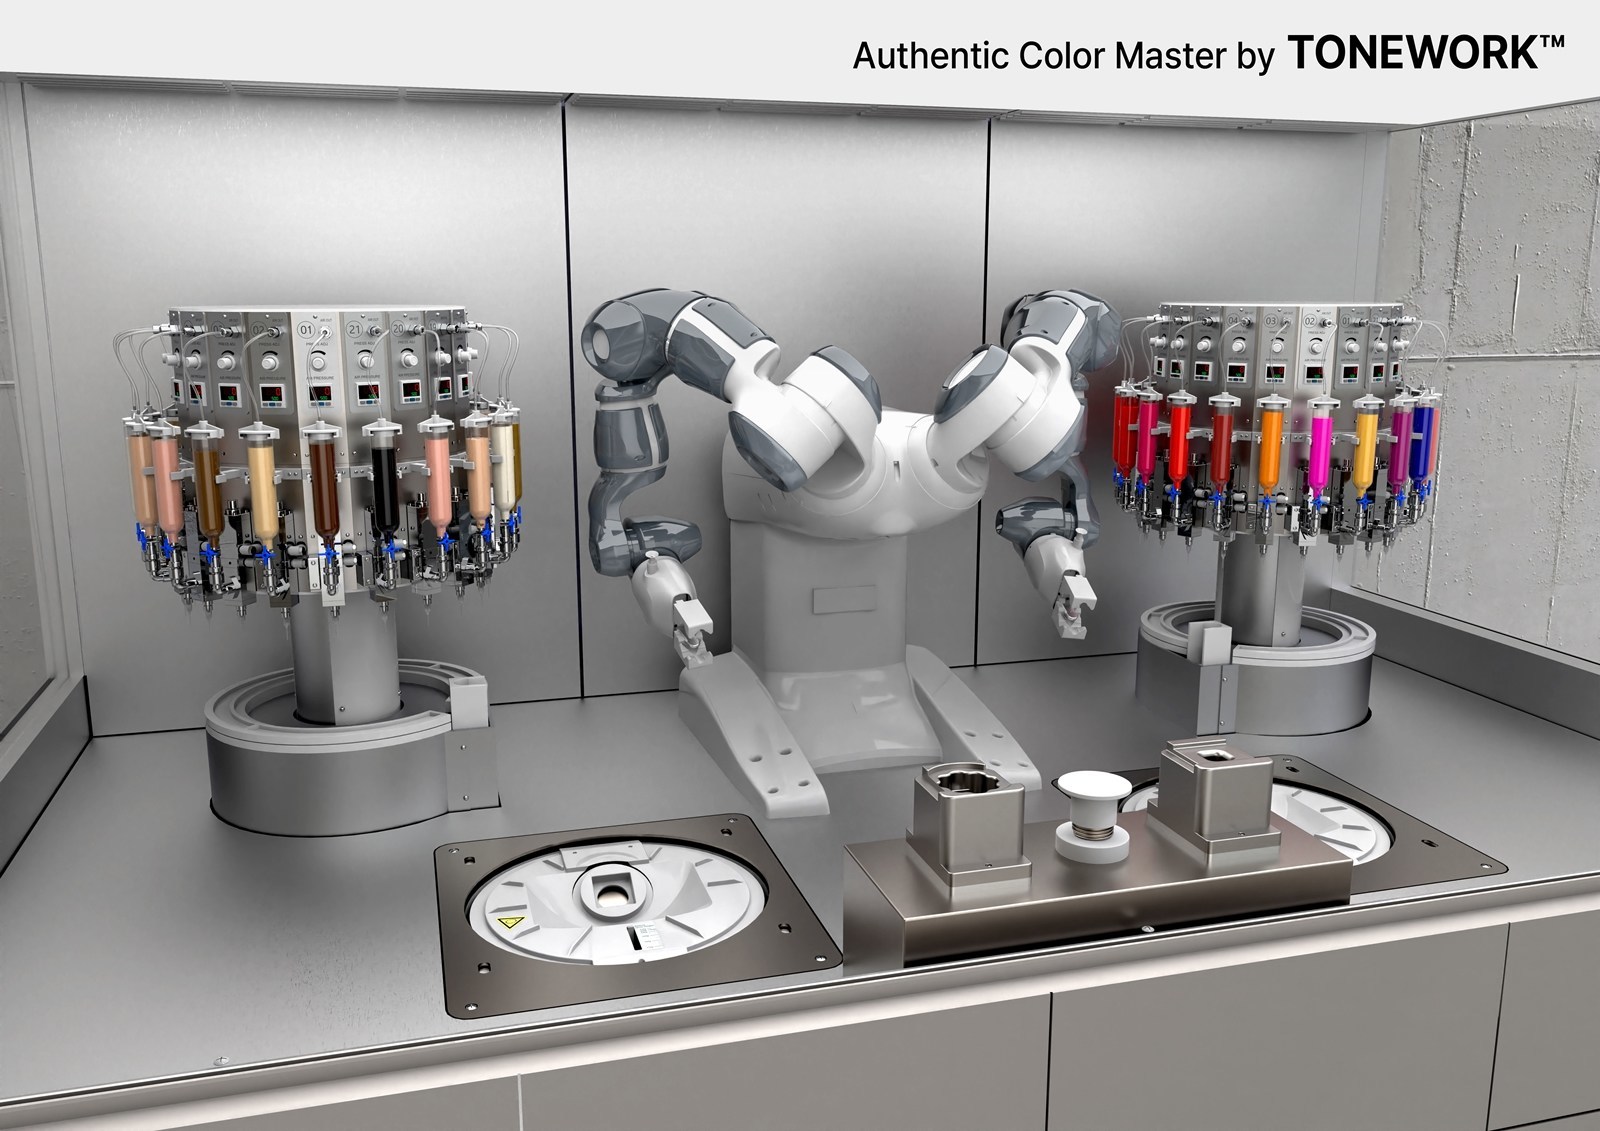 AmorepacificThe_Authentic_Color_Master_by_Tonework_received_the_CES_2023_Innovation_Award_in_the_Robotics_catego.jpg